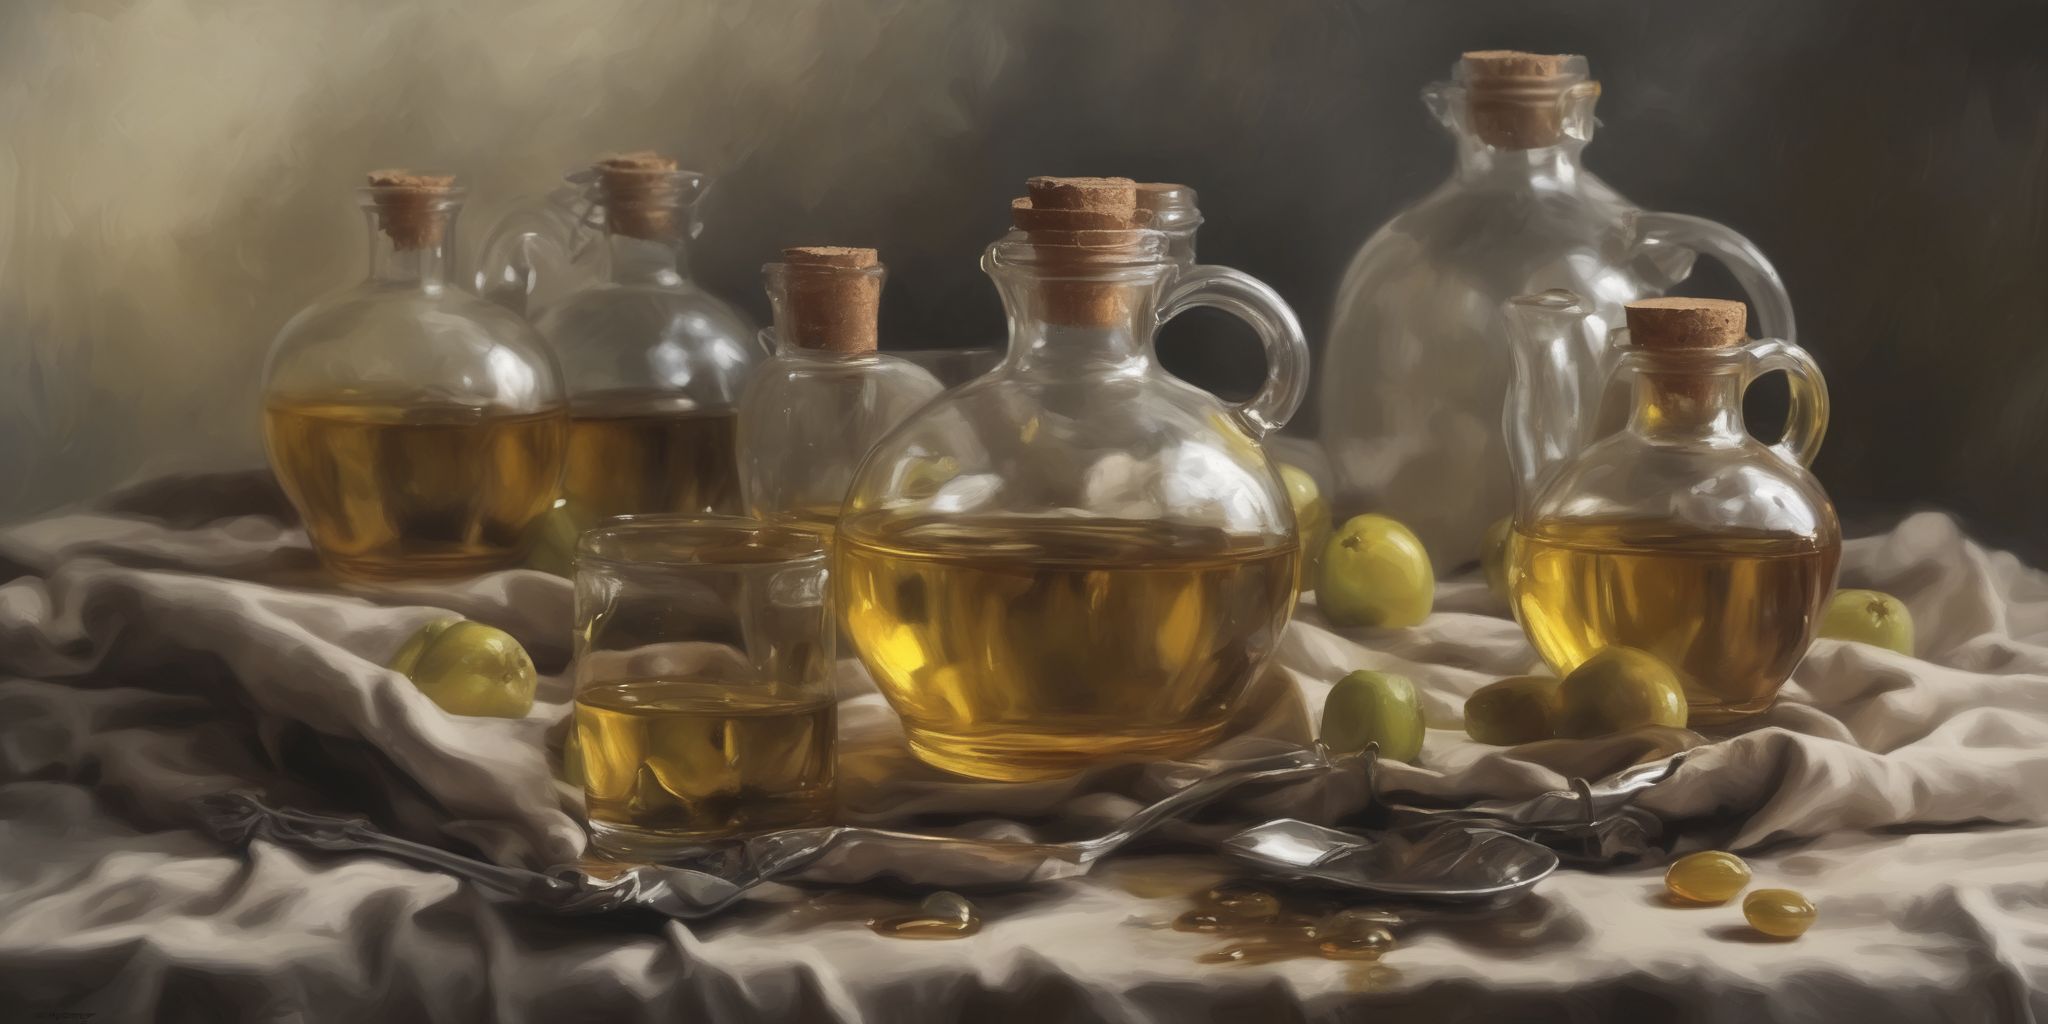 Oil  in realistic, photographic style